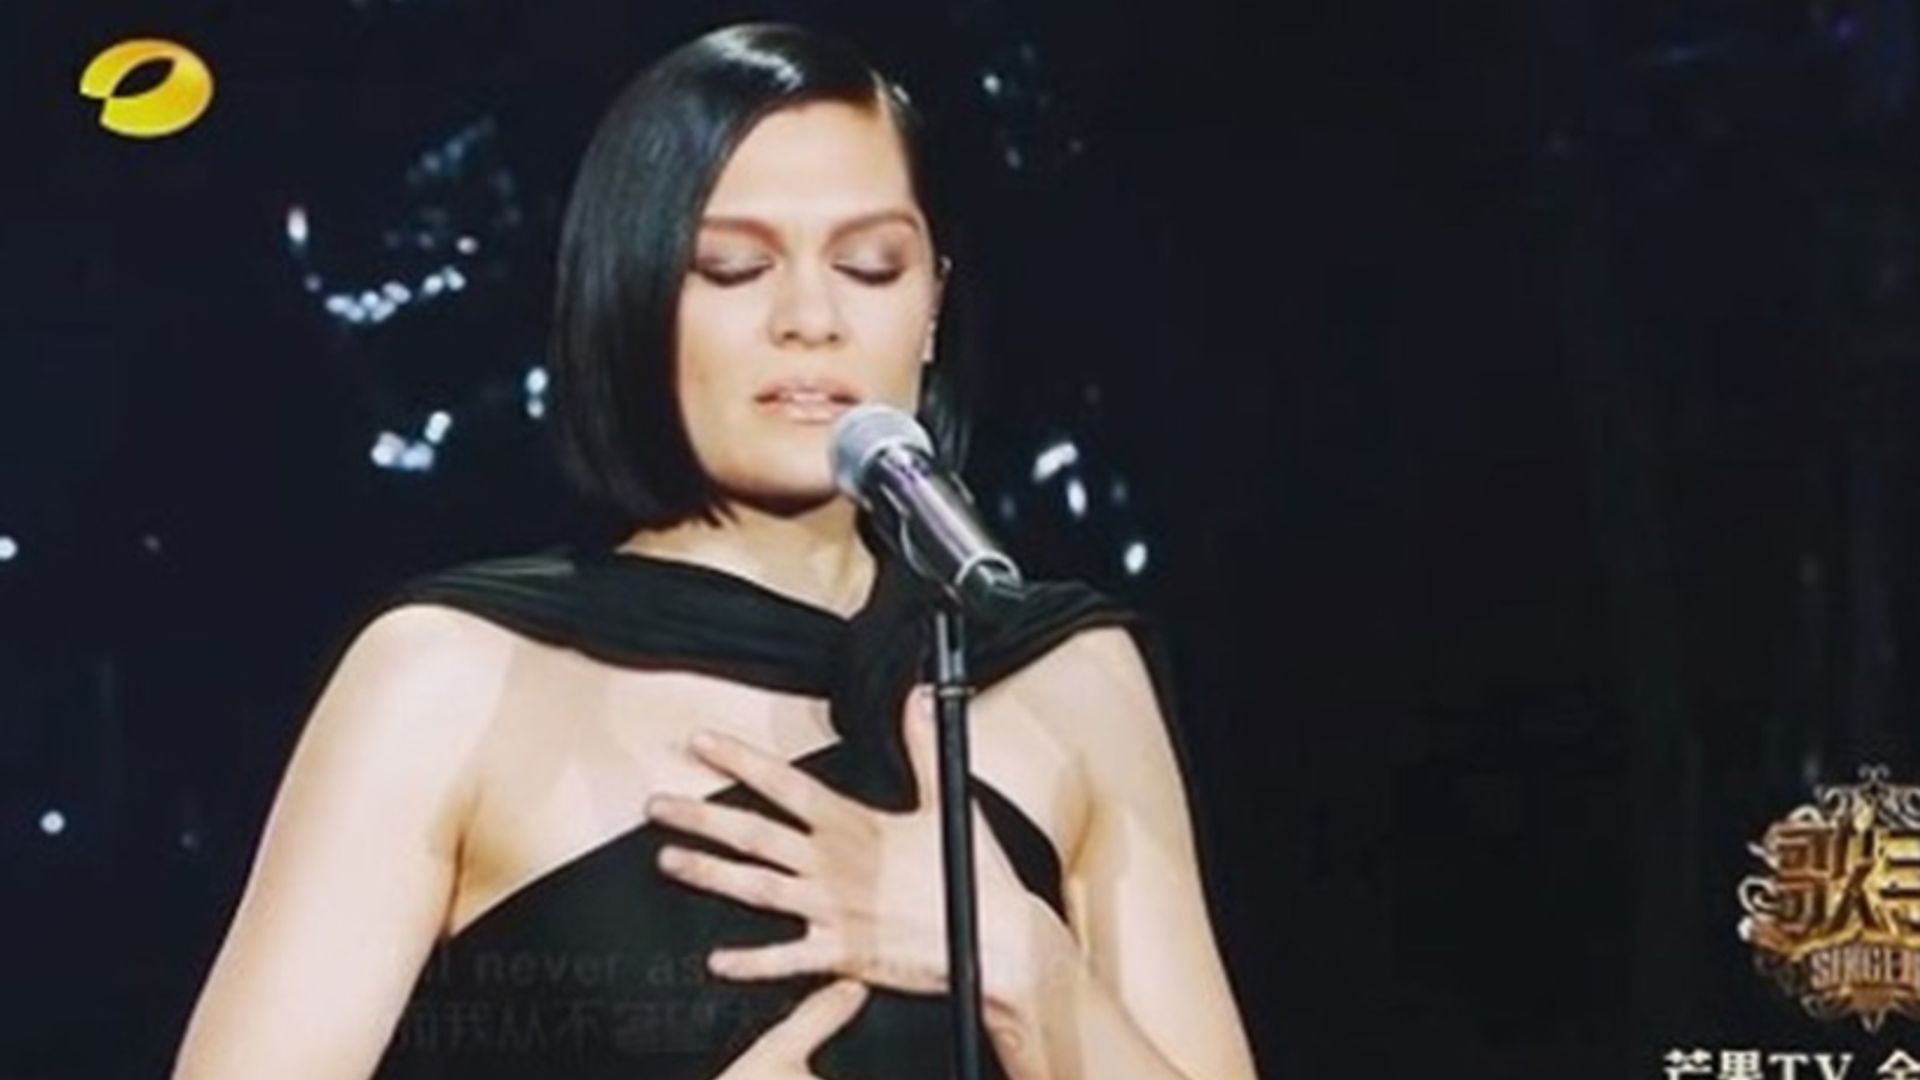 Jessie J just won a Chinese reality singing show